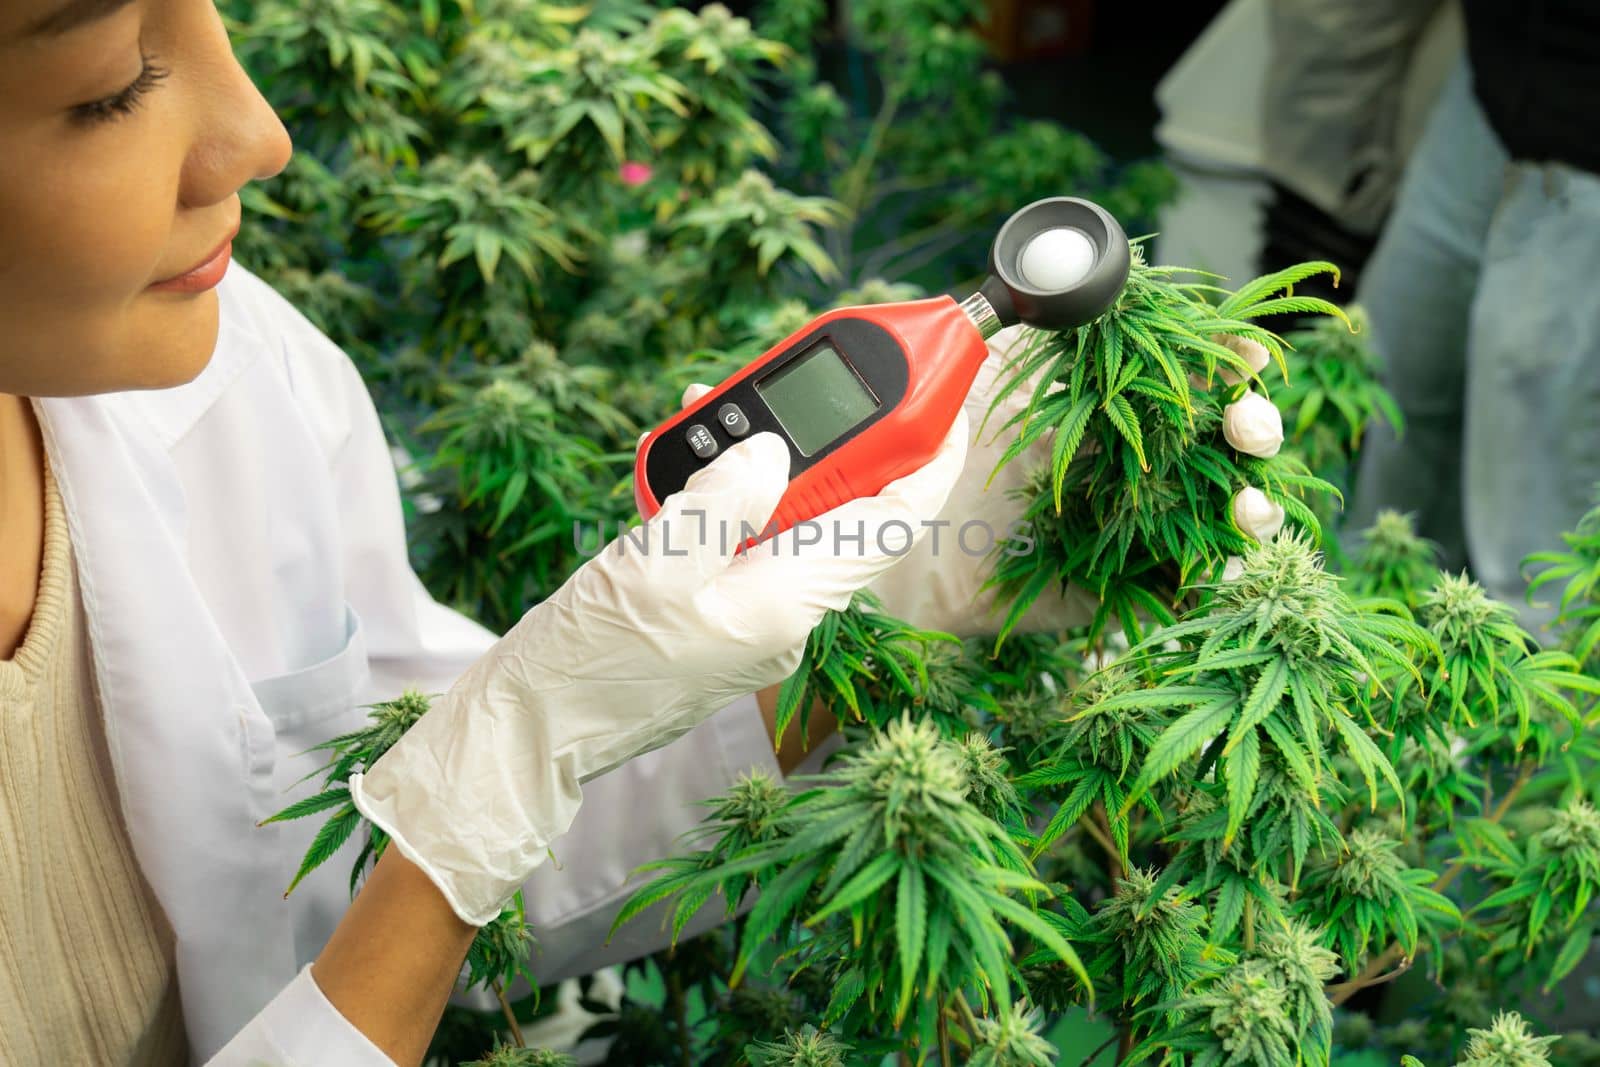 Scientist is measuring temperature and humidity on gratifying cannabis plants and buds in medicinal indoor cannabis farm using thermometer and hygrometer. Concept of cannabis farm in grow facility.